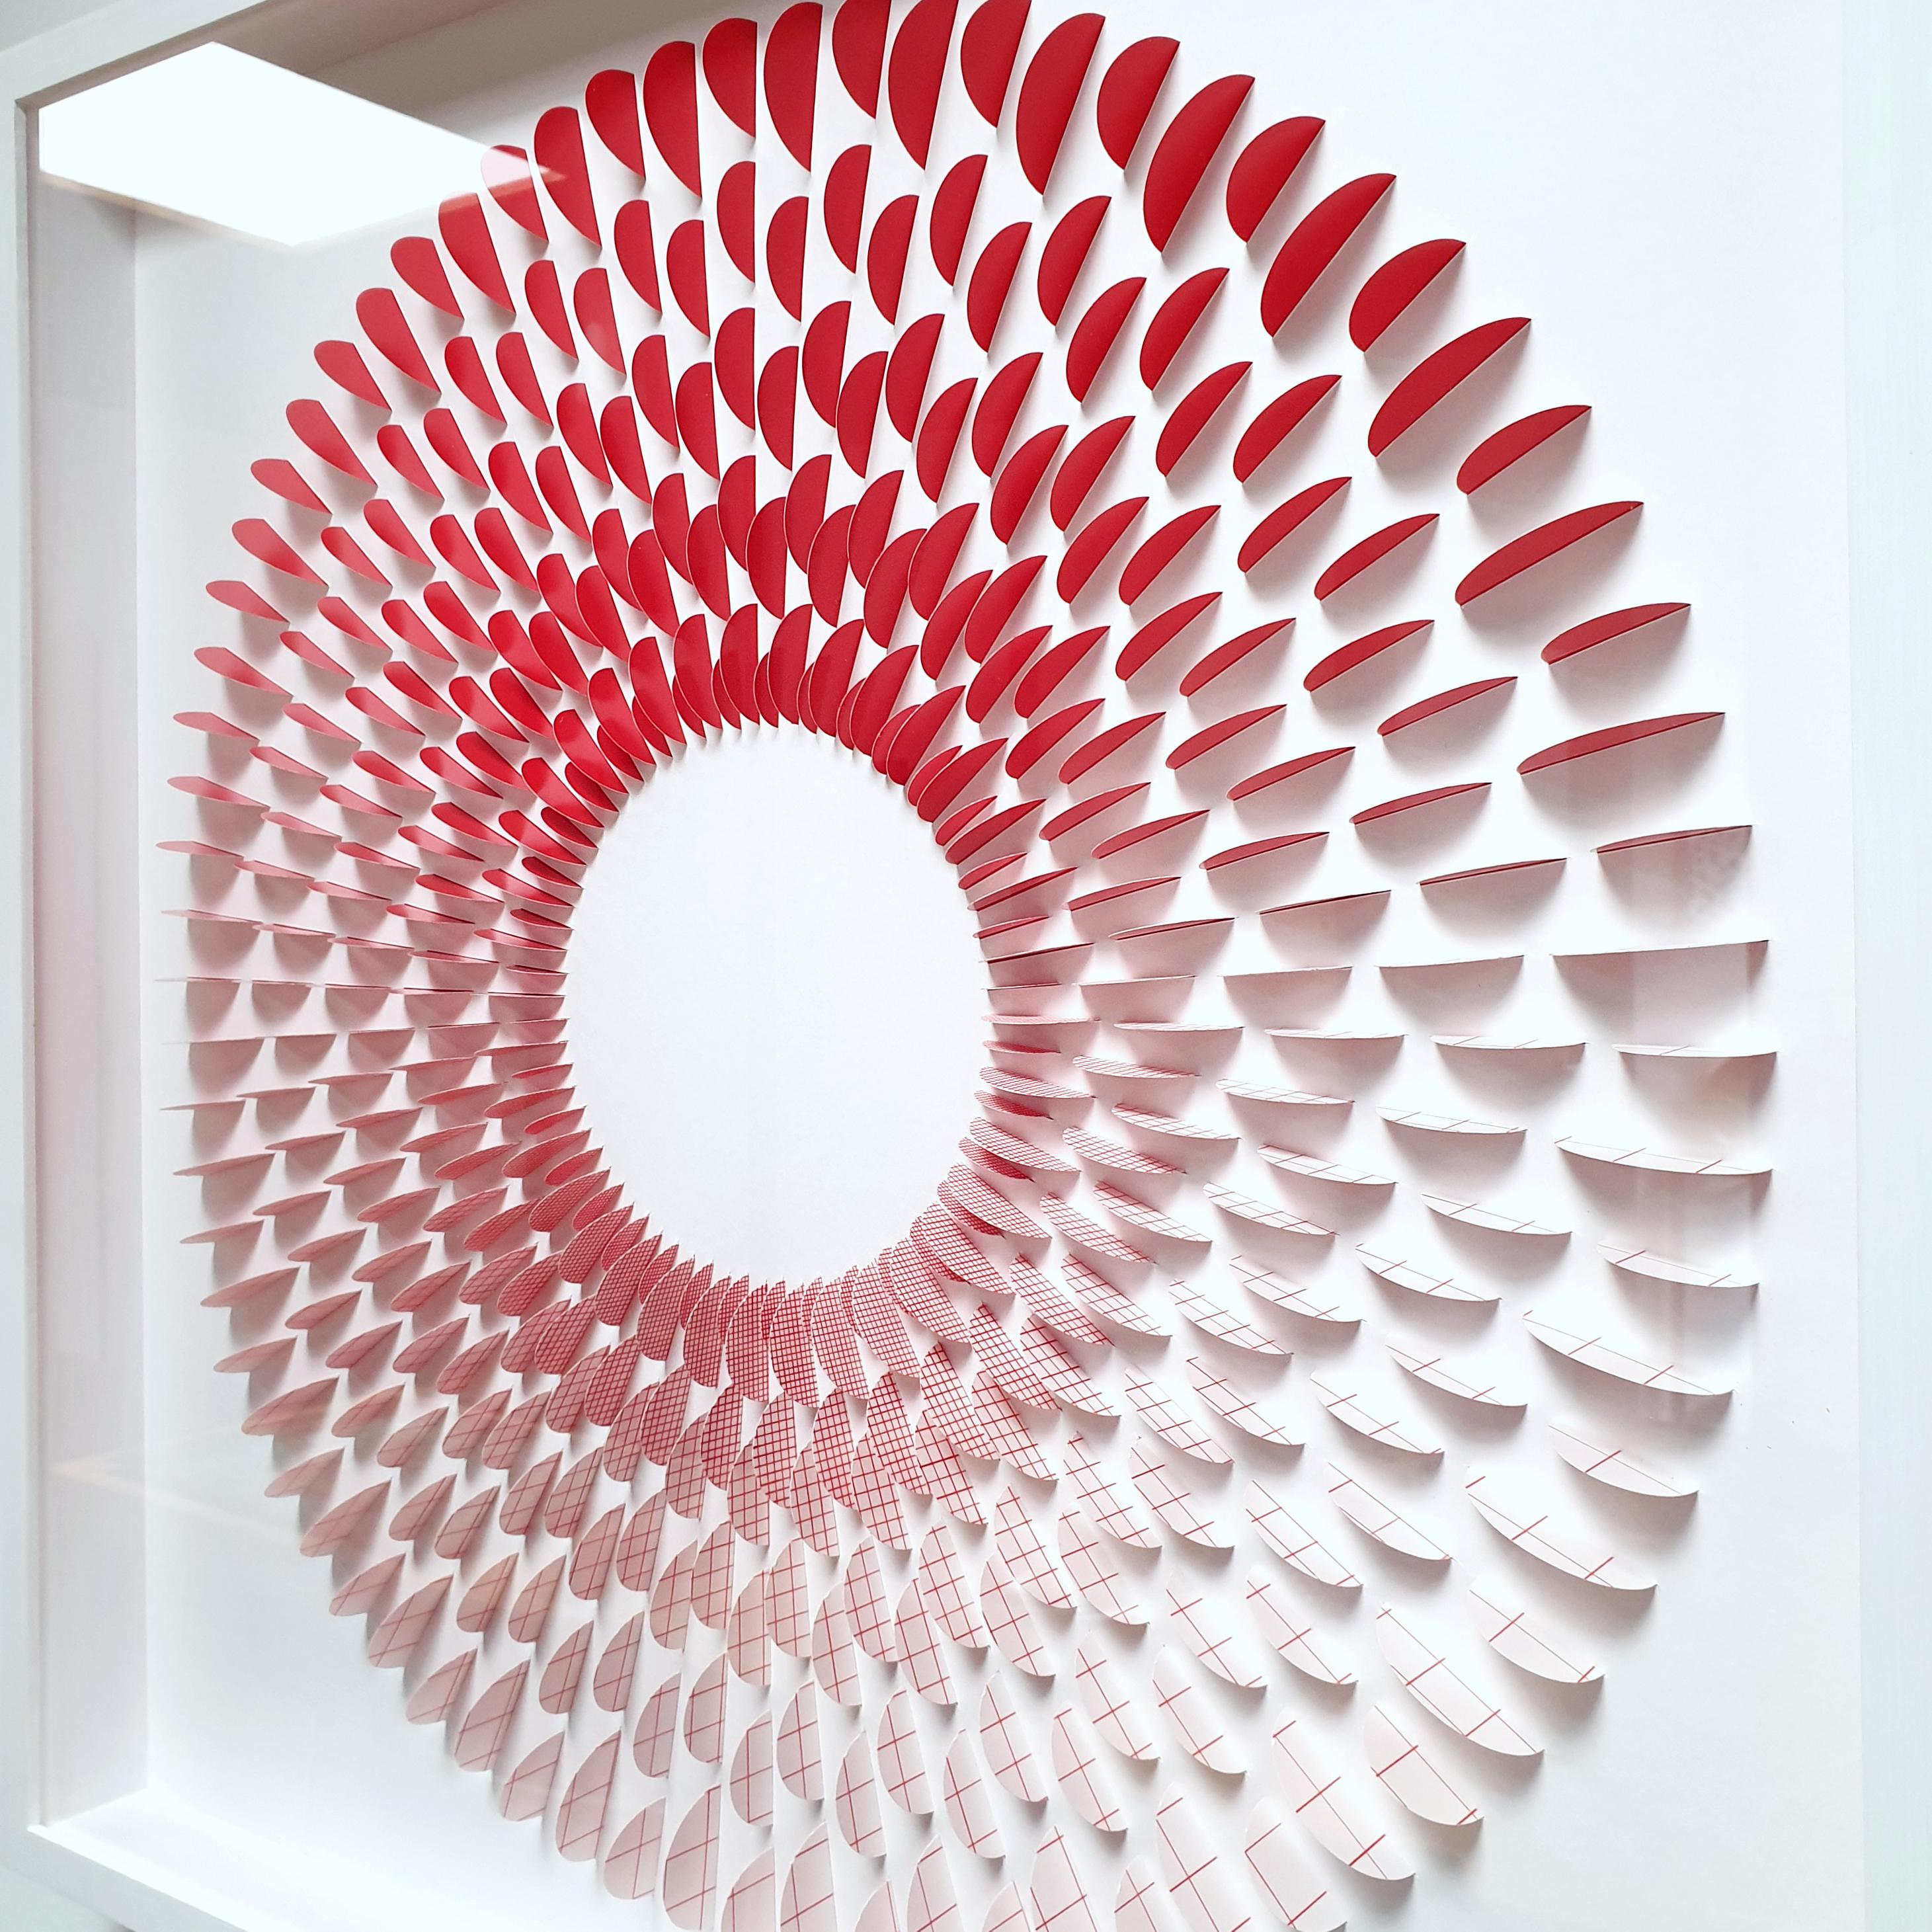 Rozetta Raster Red is a unique contemporary modern paper relief by renowned Polish-Dutch artist Eliza Kopec. This relief is a typical example of her preferred minimalist abstract geometric vocabulary, formal and strict, but at the same time